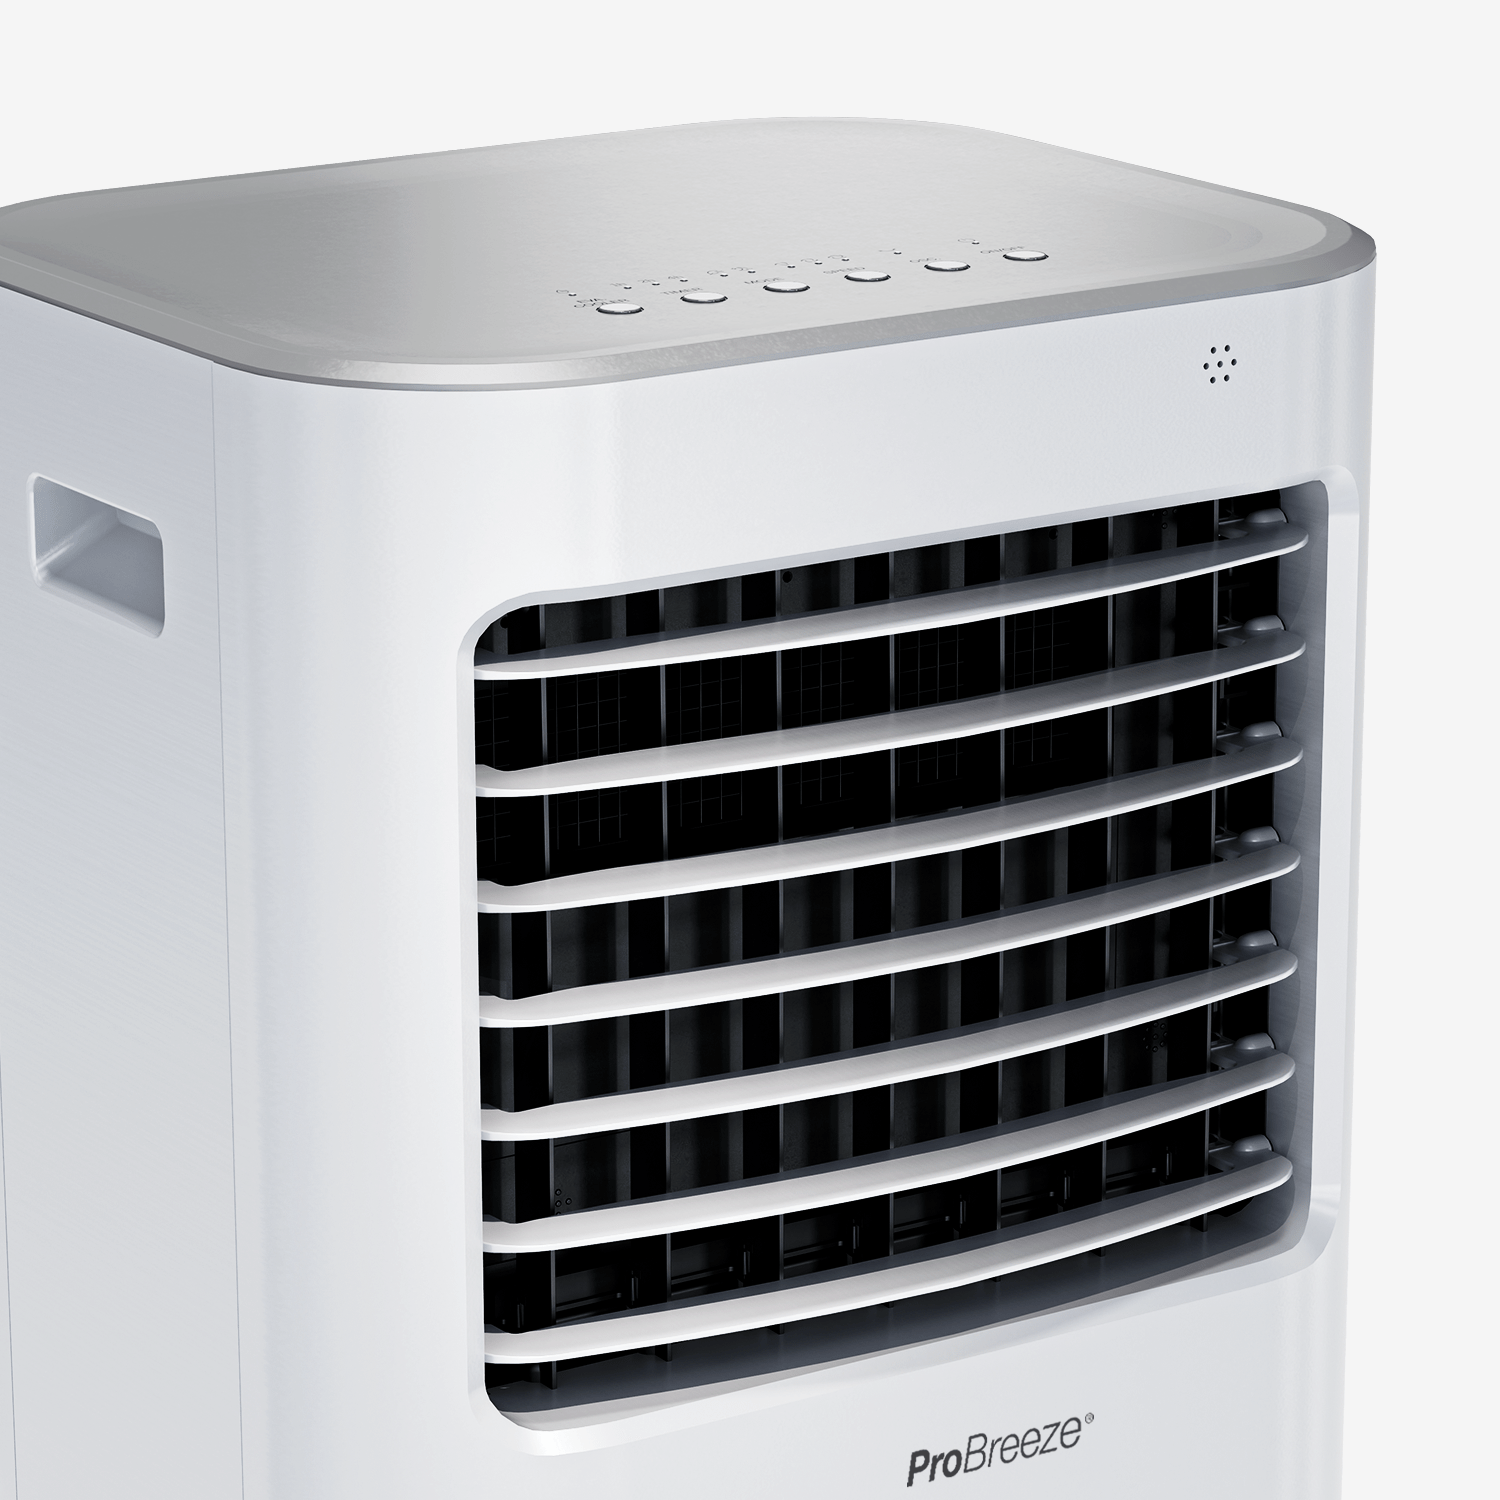 Refurbished - 10L Portable Air Cooler with 4 Operational Modes, 3 Fan Speeds, LED Display & Remote Control